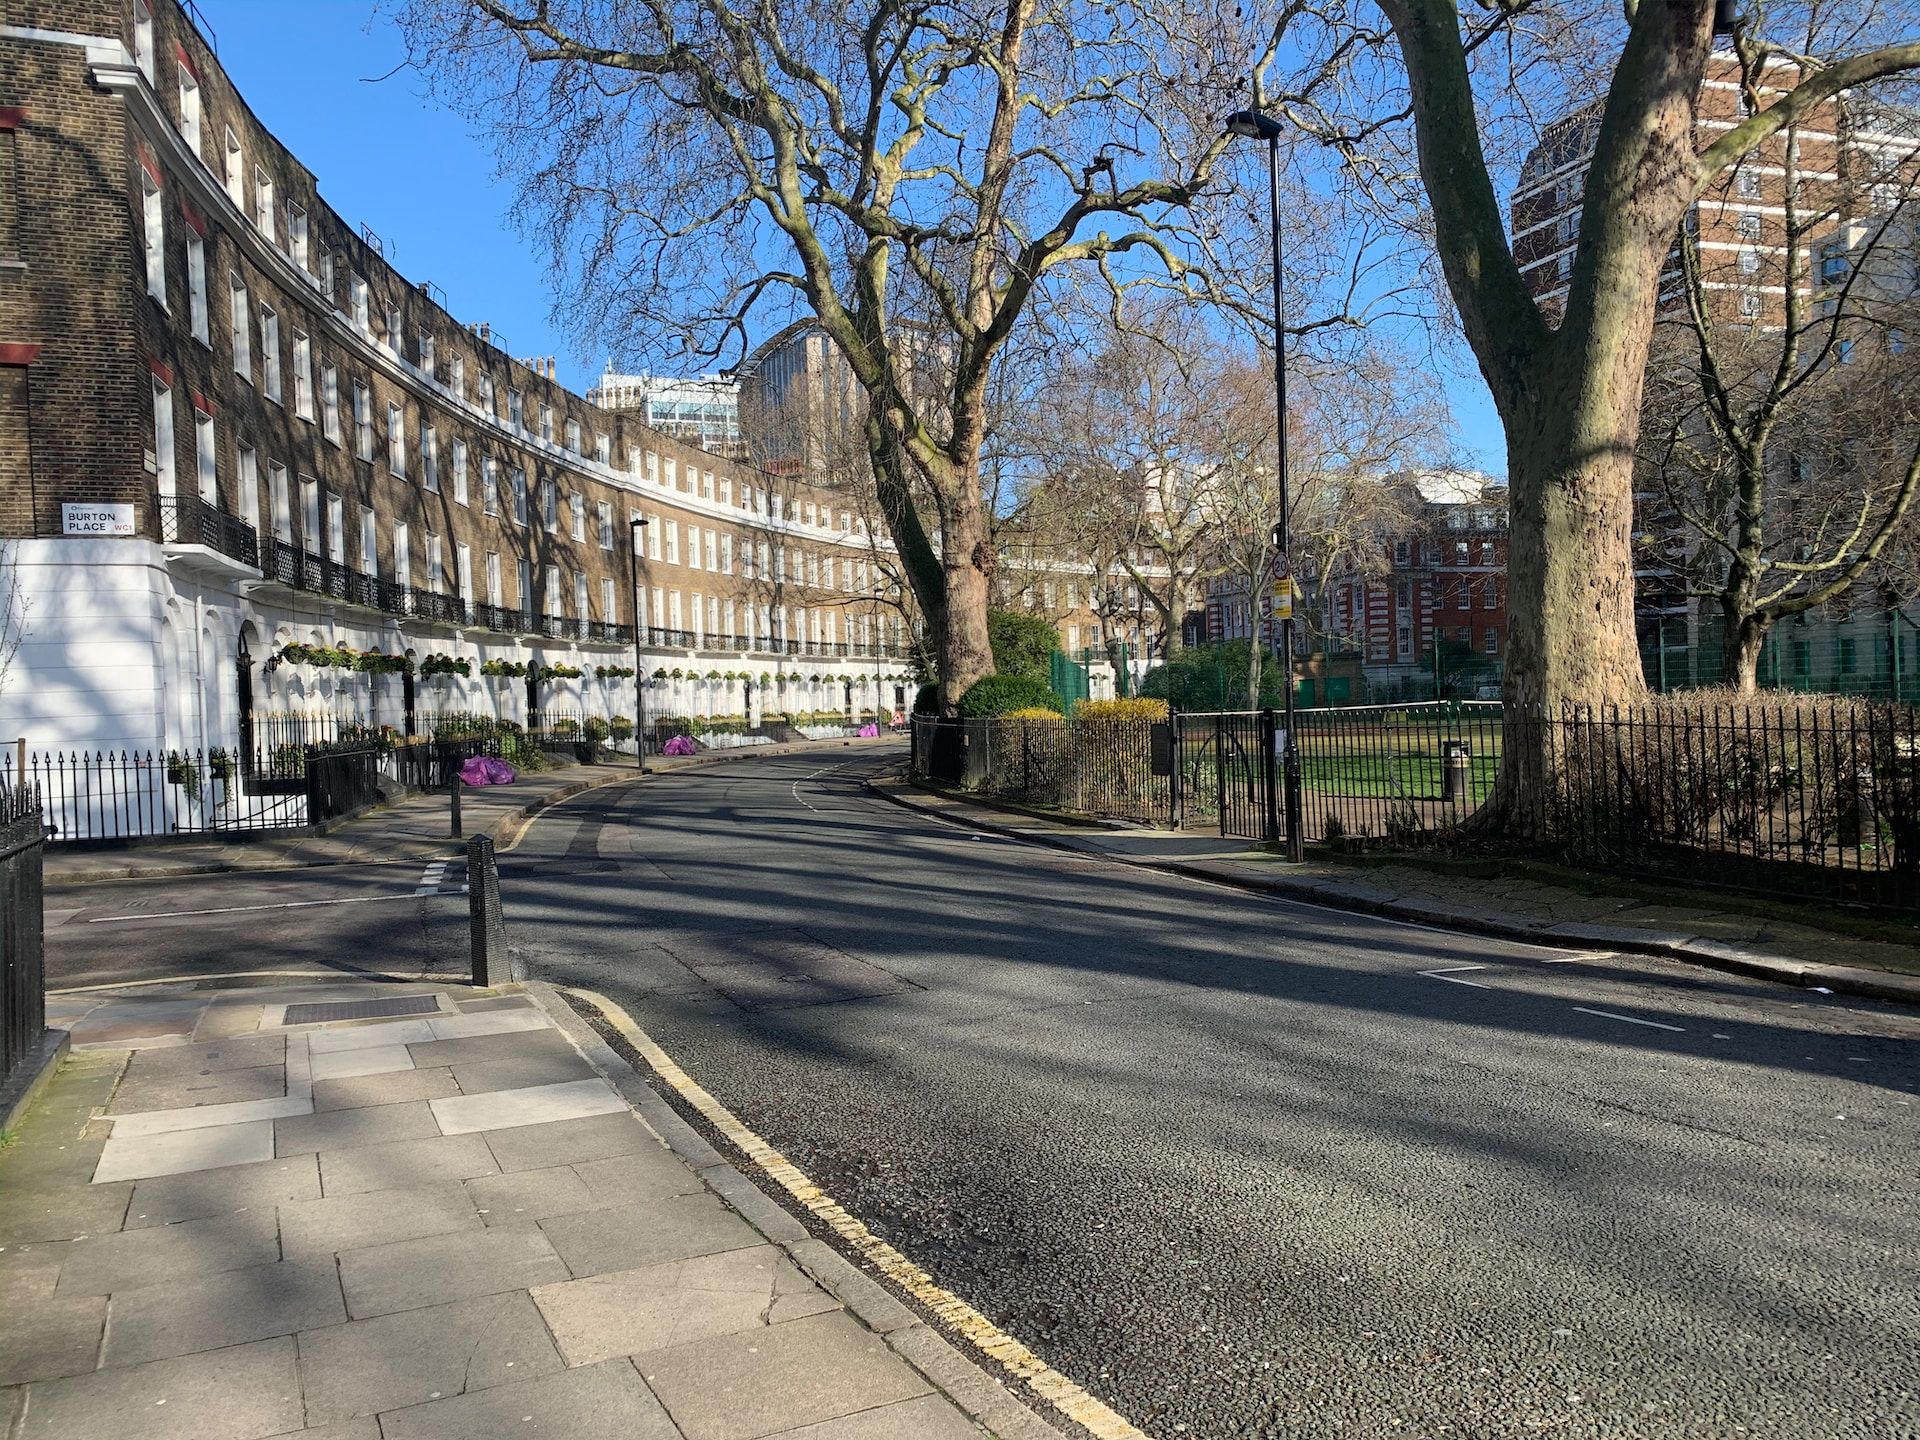 Central London, Bloomsbury street with a row of buildings and trees.